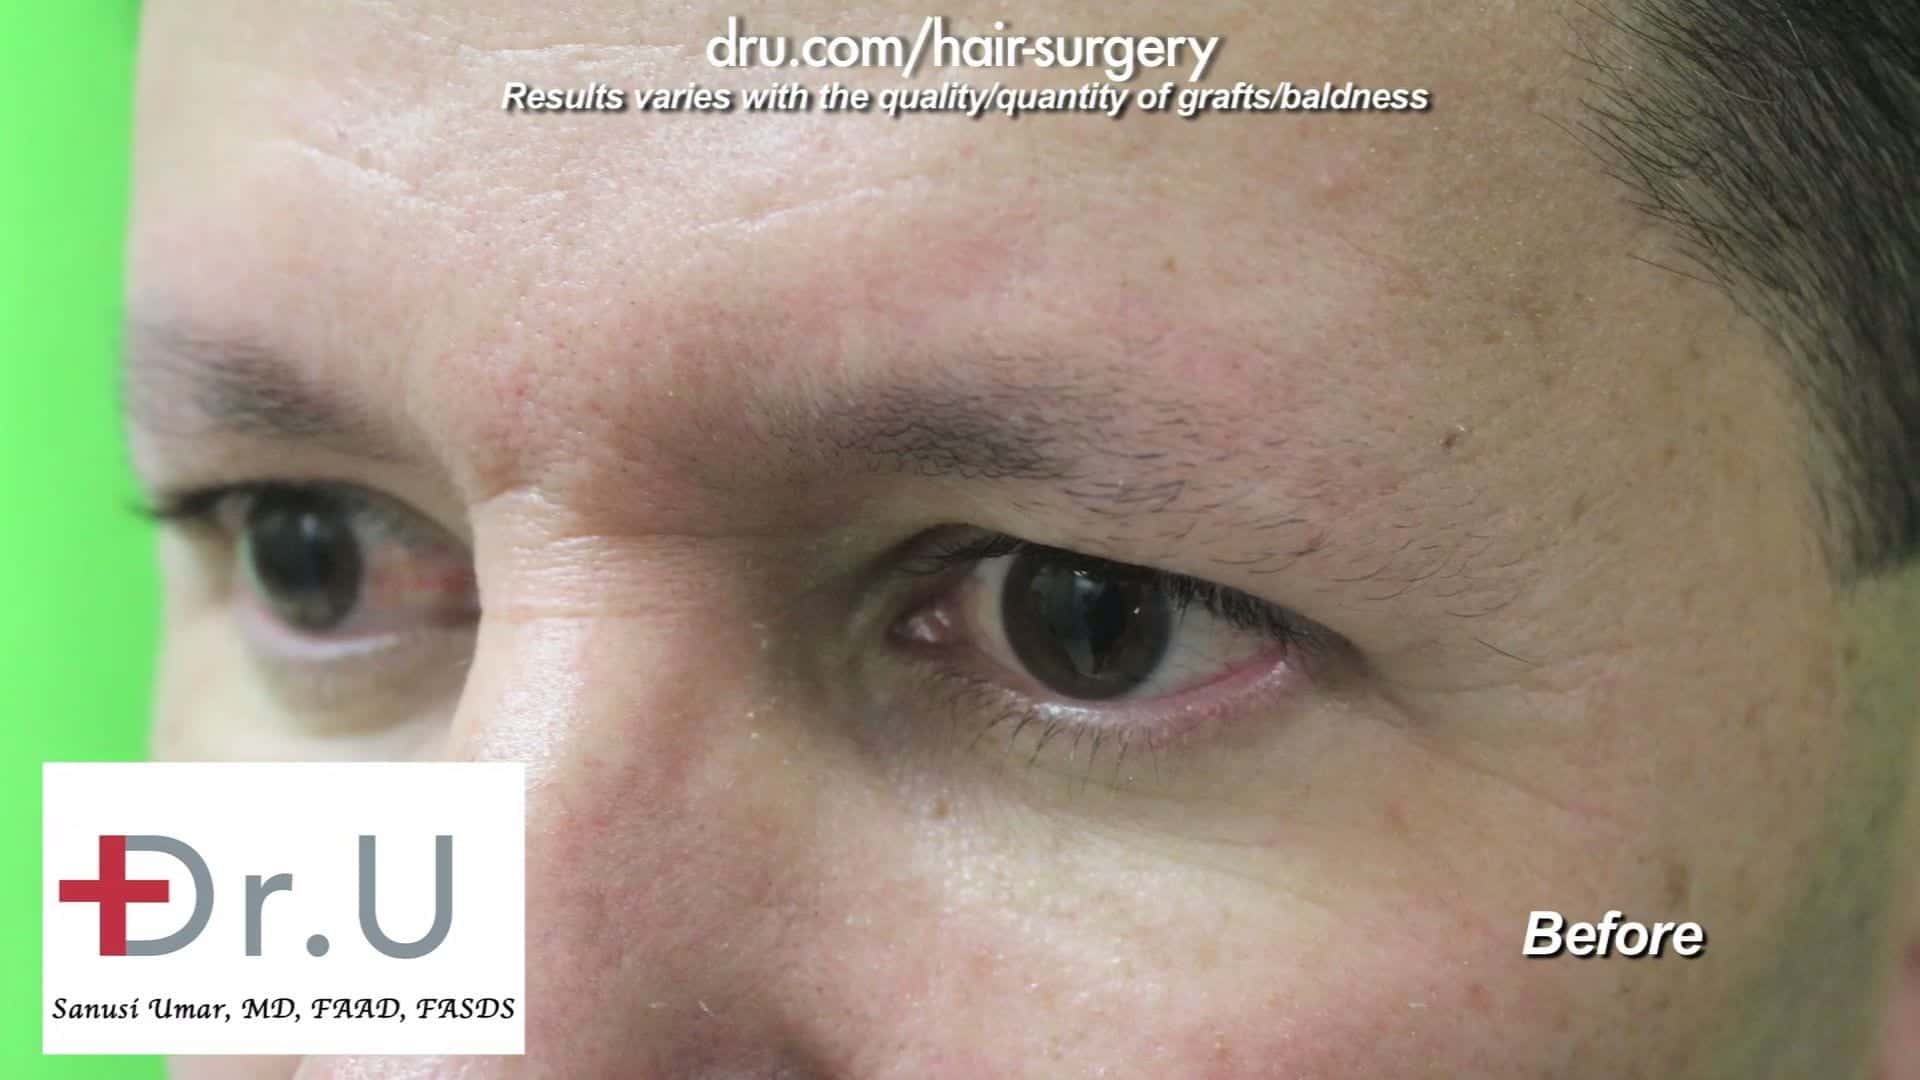 VIDEO: Male Eyebrow Restoration by Dr. Umar in Los Angeles